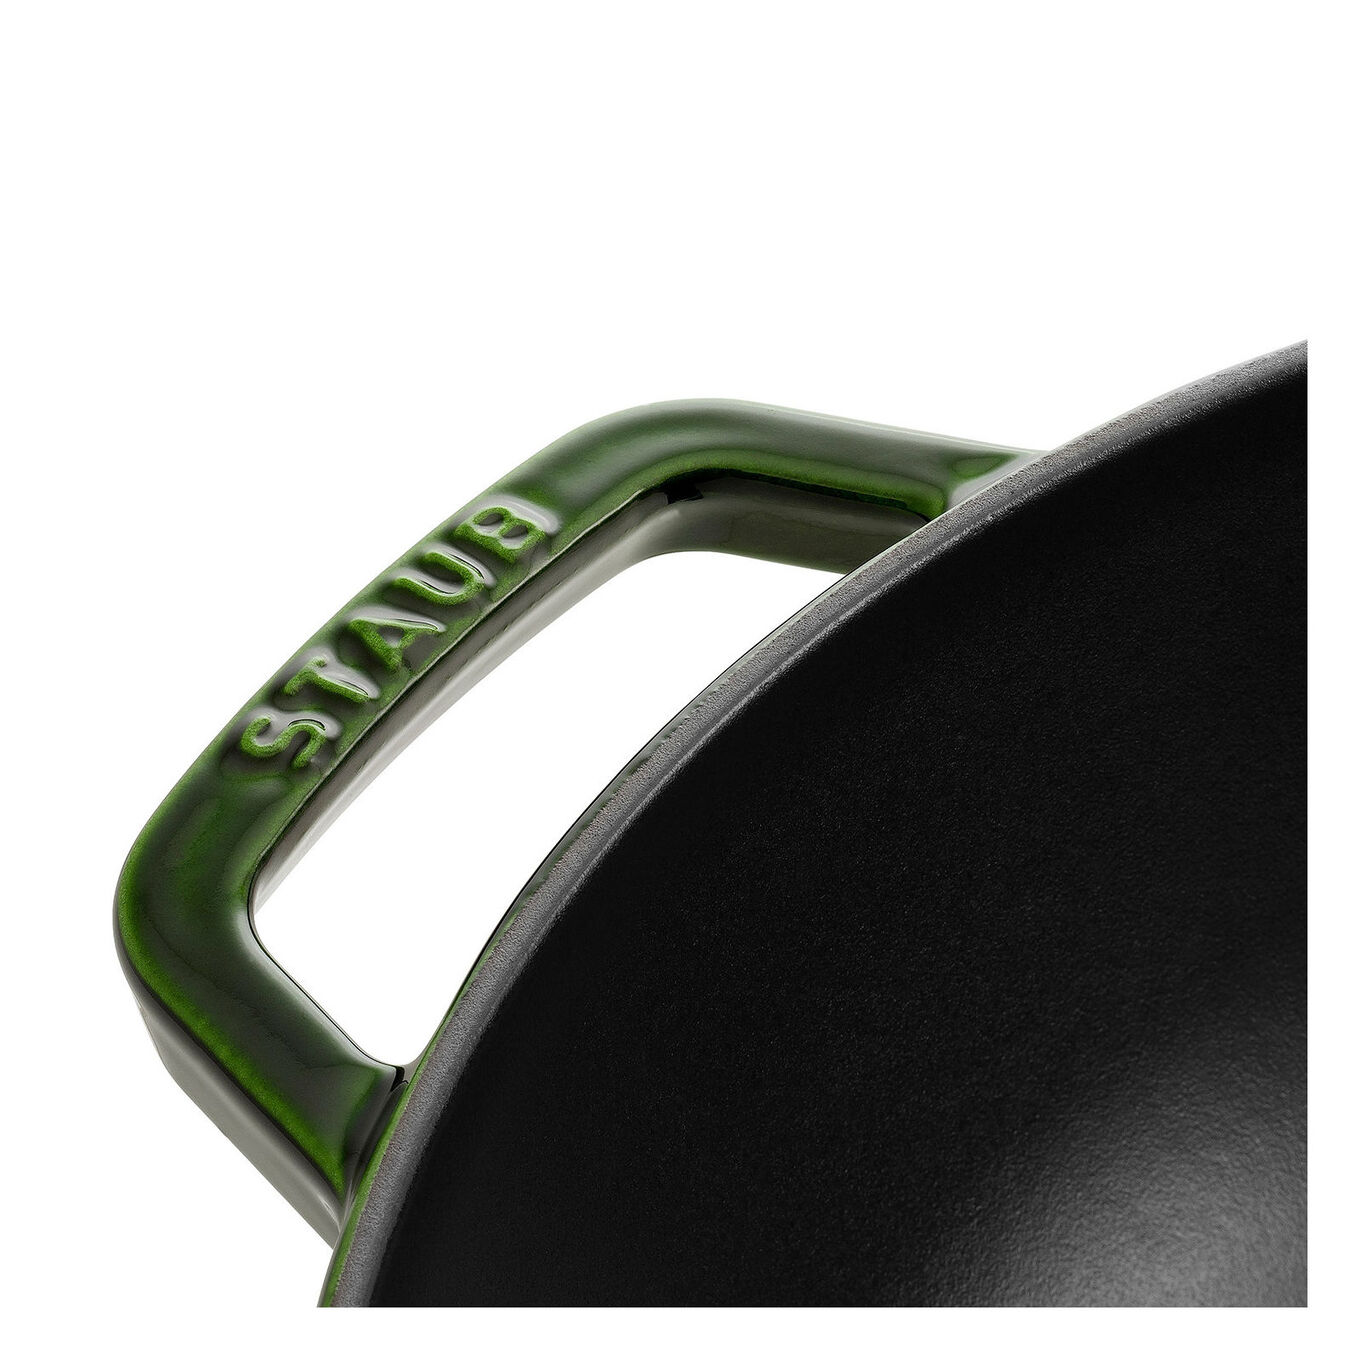 30 cm / 12 inch cast iron Wok with glass lid, basil-green,,large 2